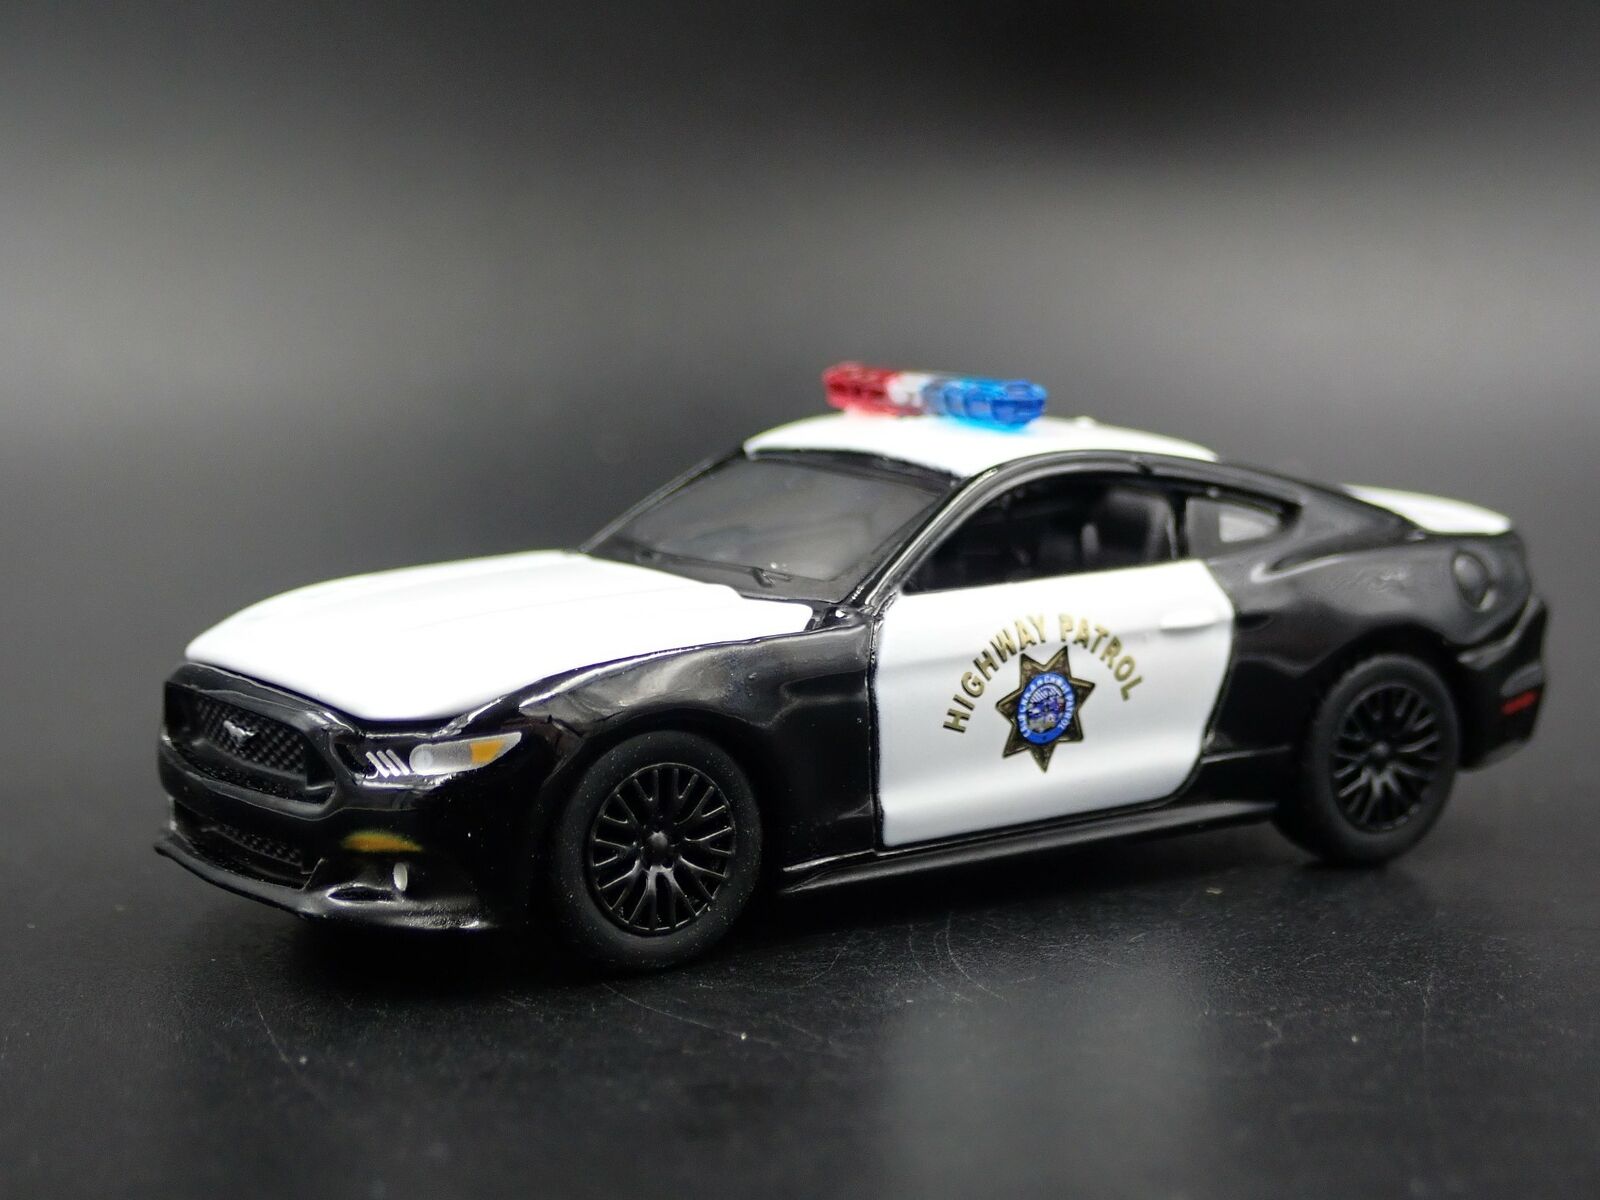 2017 17 FORD MUSTANG CHP CALIFORNIA HIGHWAY PATROL 1:64 SCALE DIECAST MODEL CAR